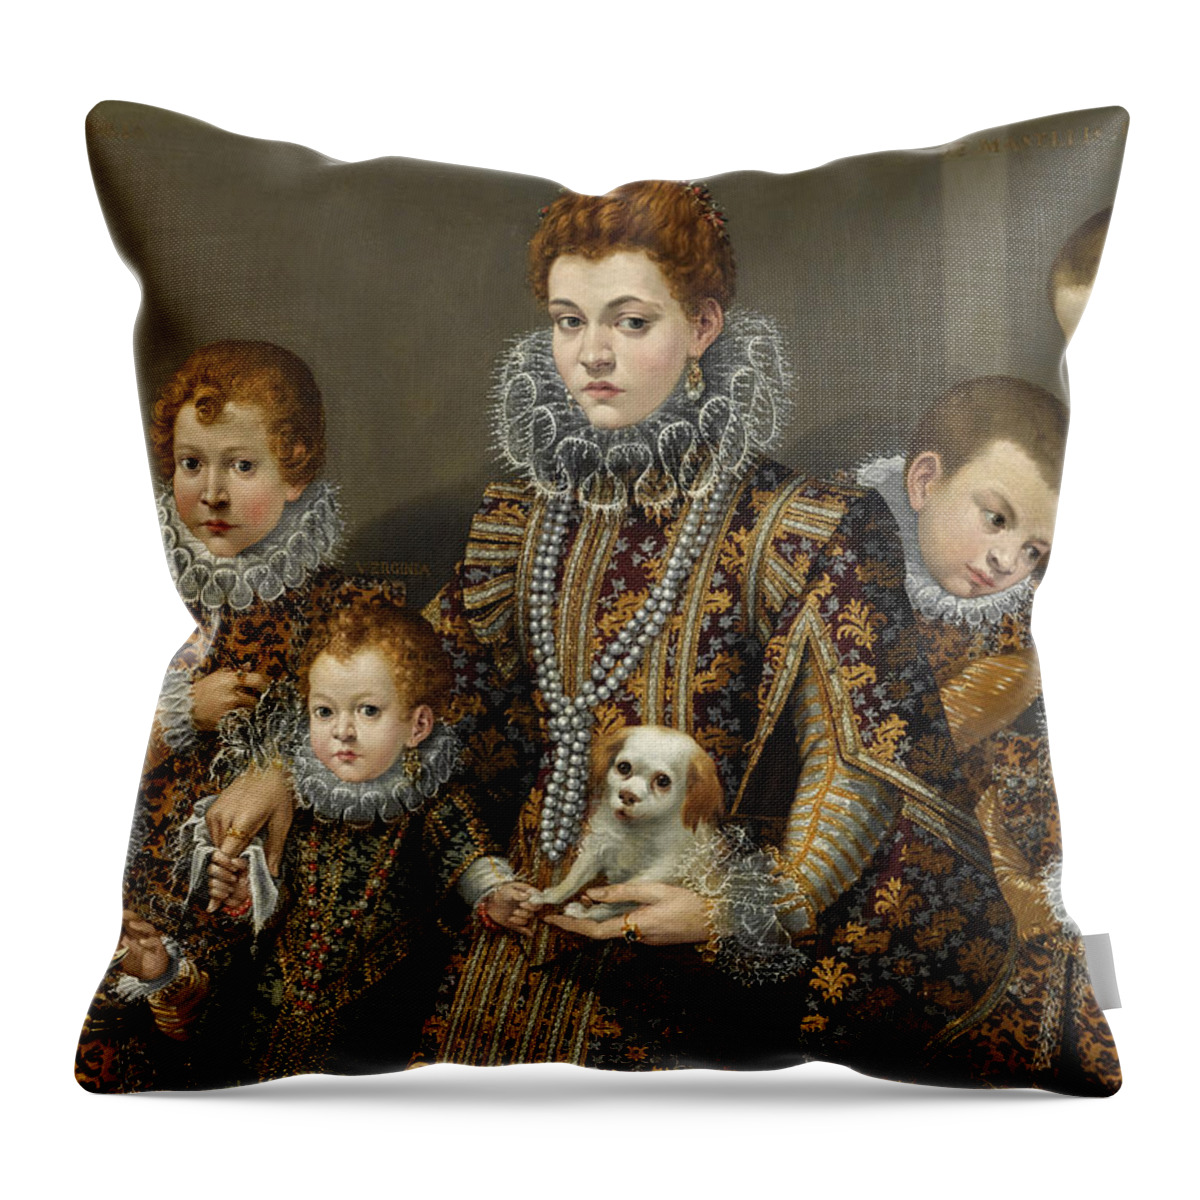 Lavinia Fontana Throw Pillow featuring the painting Portrait of Bianca degli Utili Maselli wife of the nobleman Pierino Maselli with six of her children by Lavinia Fontana